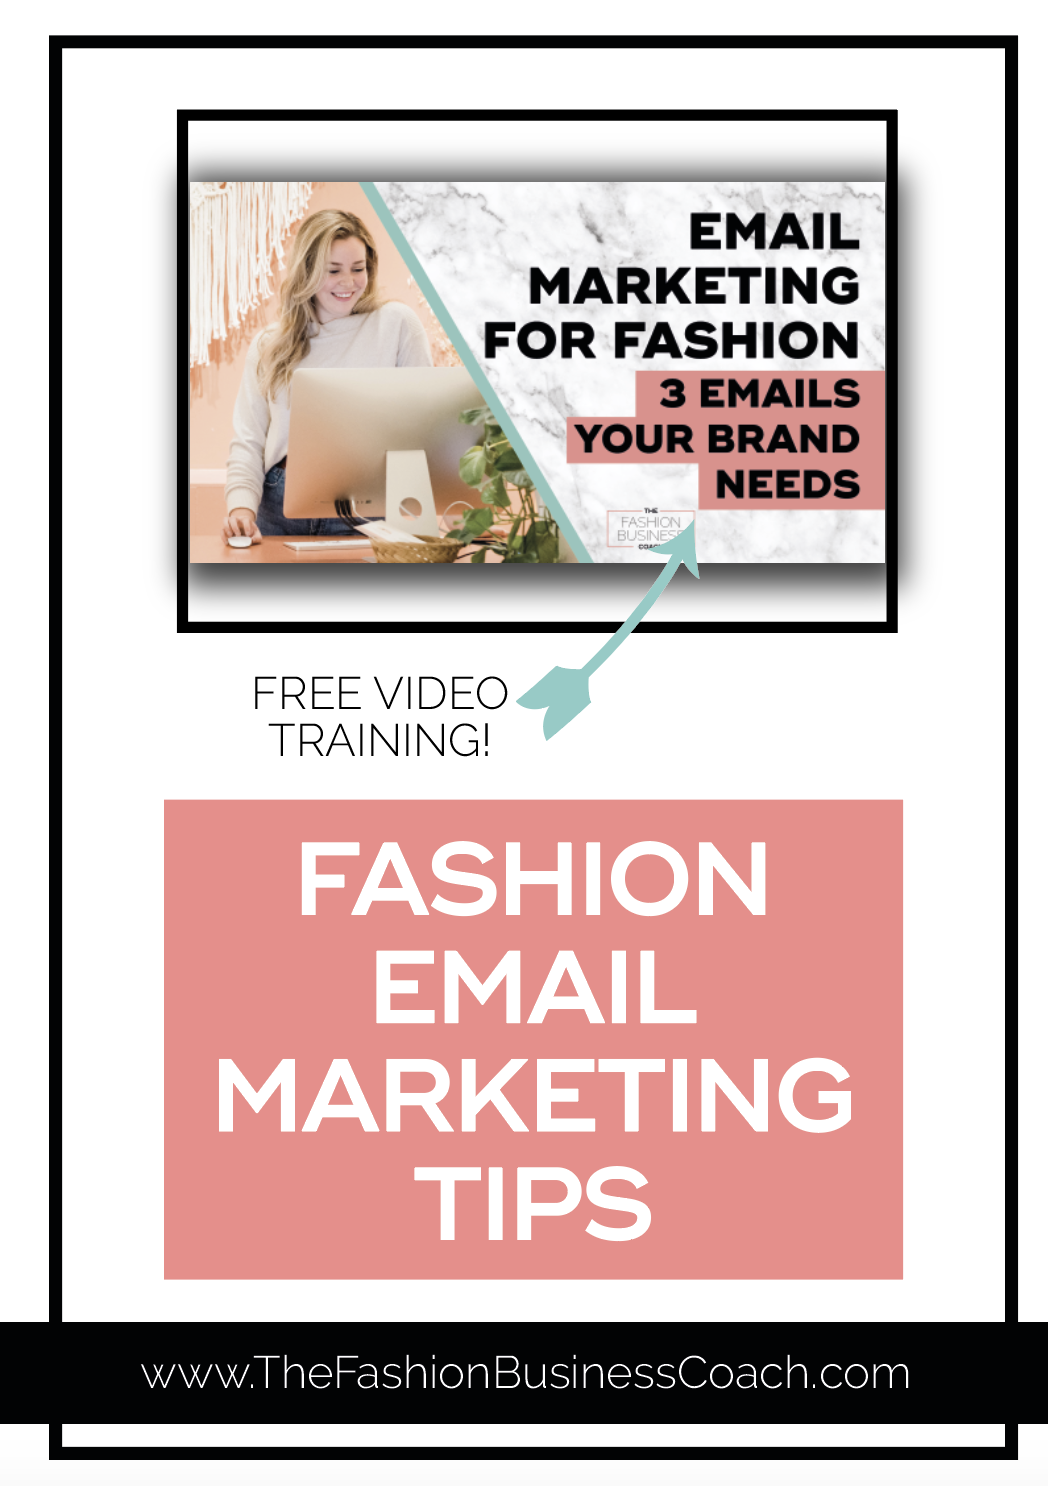 Fashion Email Marketing Tips 4.png